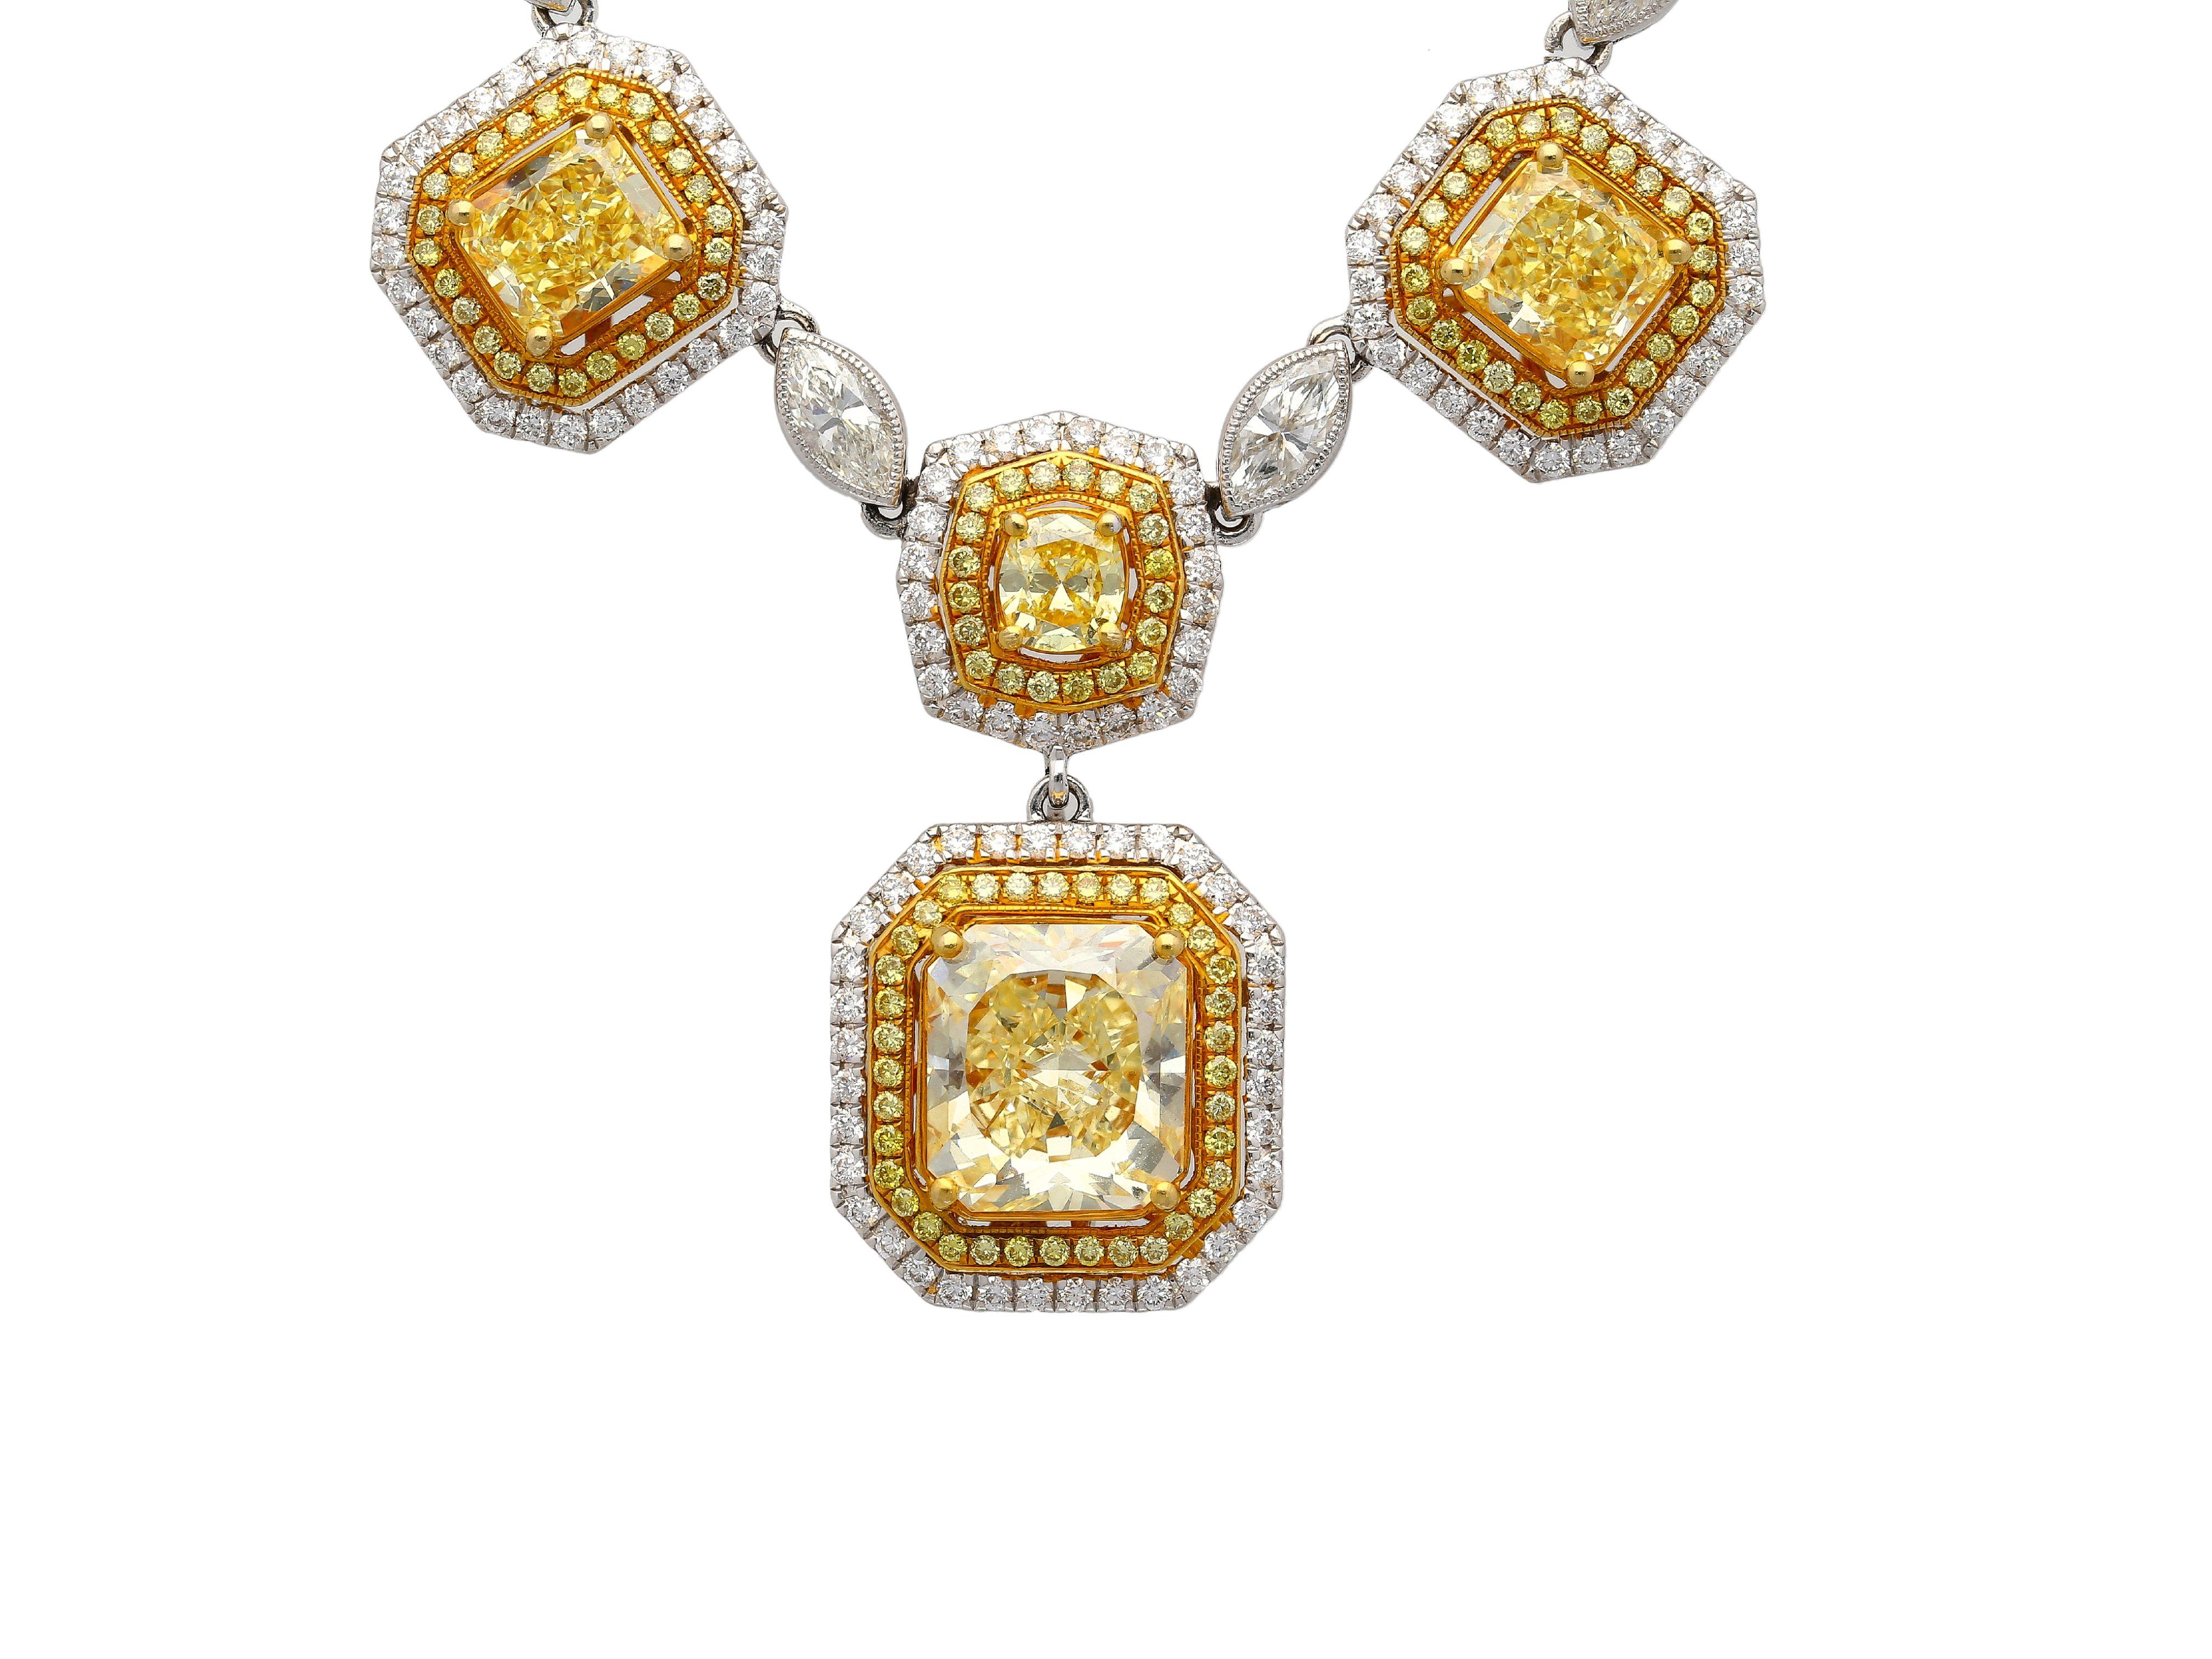 Introducing a masterpiece in luxury and fine jewelry. A 25-carat total Fancy Yellow and White Diamond charm style necklace in 18k solid gold. Each charm features a white and yellow diamond double halo, separated by round and marquise cut bezel